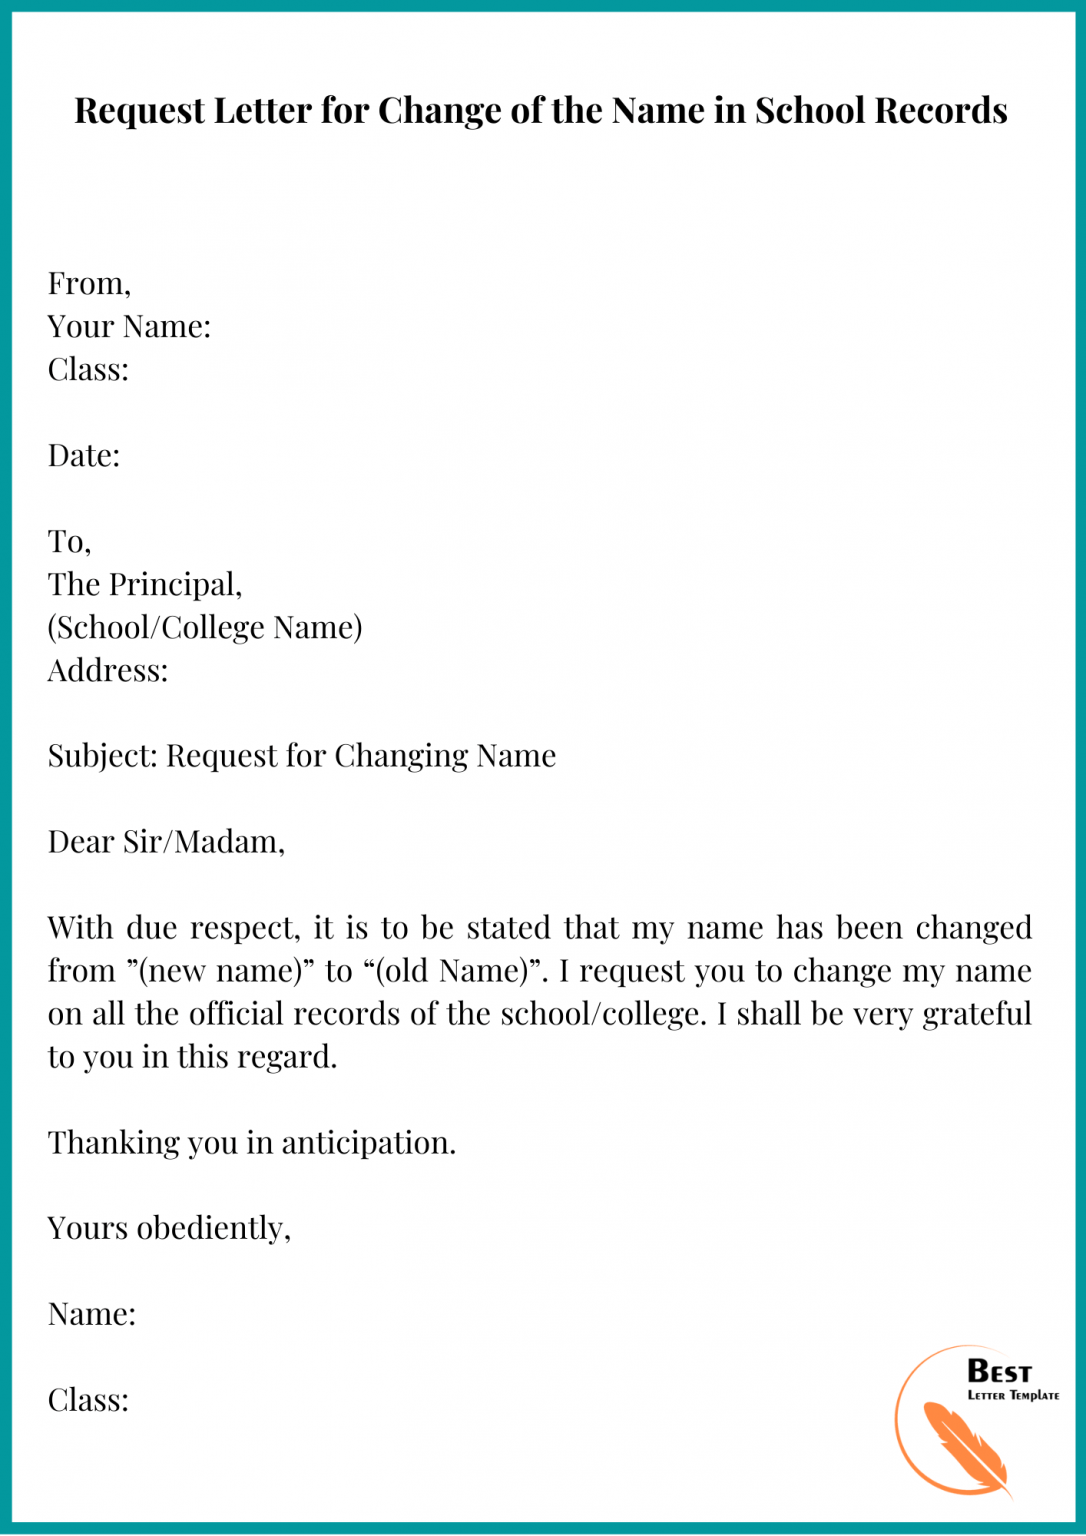 sample-name-change-request-letter-template